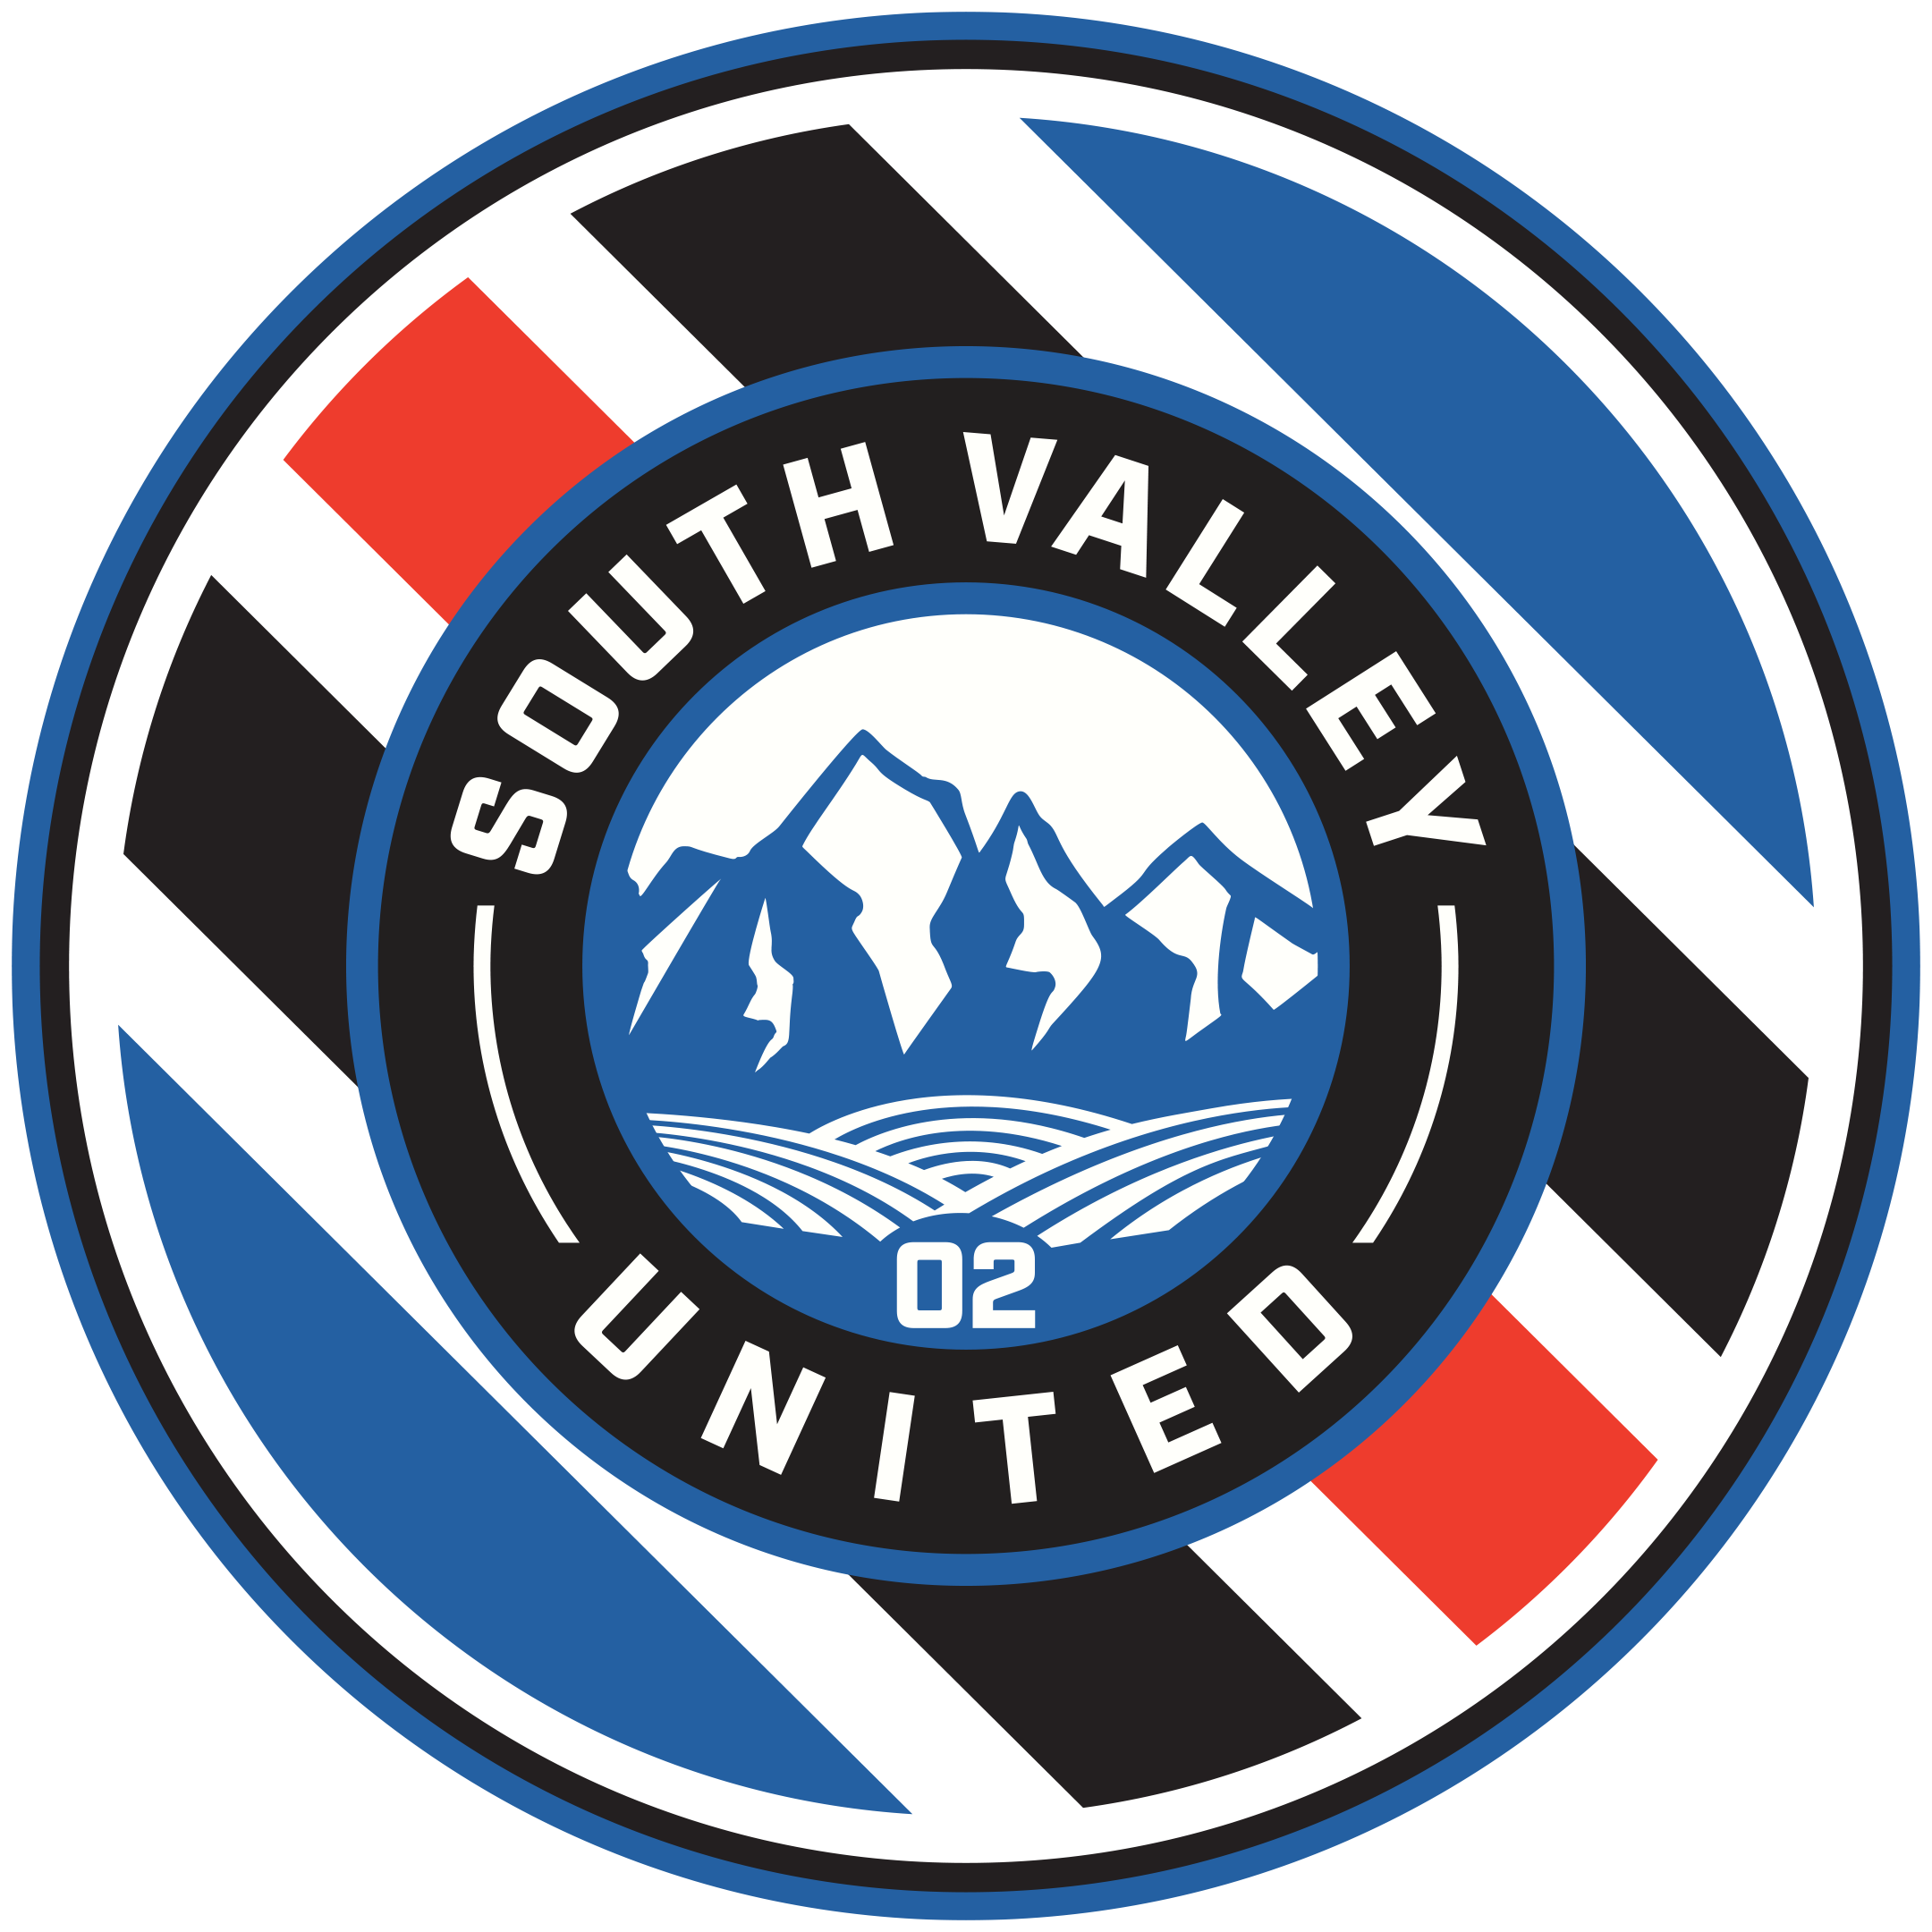 South Valley United SC team badge